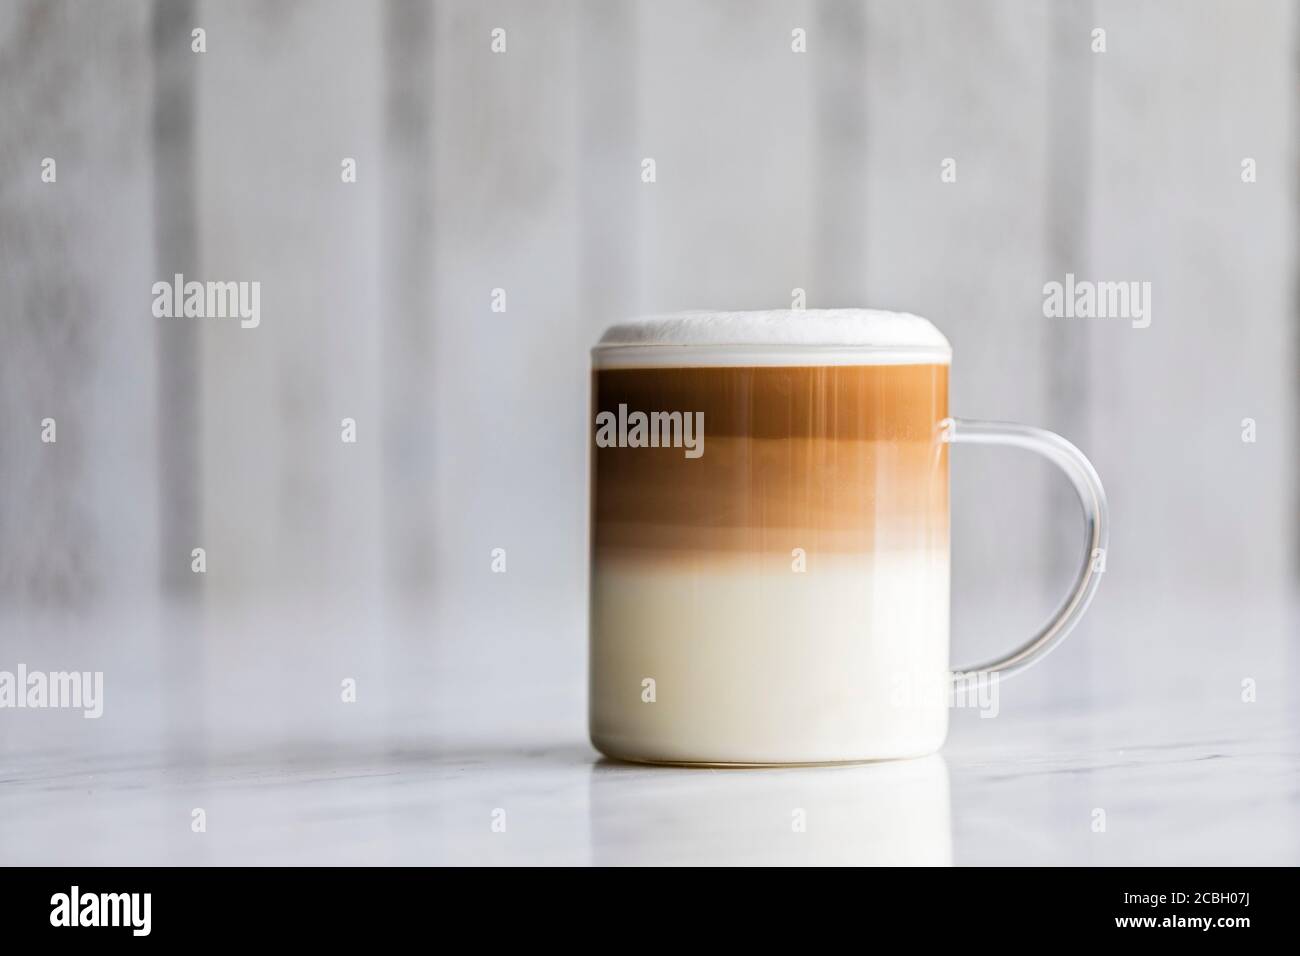 Cafe latte macchiato layered coffee in a see through glass coffee cup. The cup has a white wooden background. Stock Photo